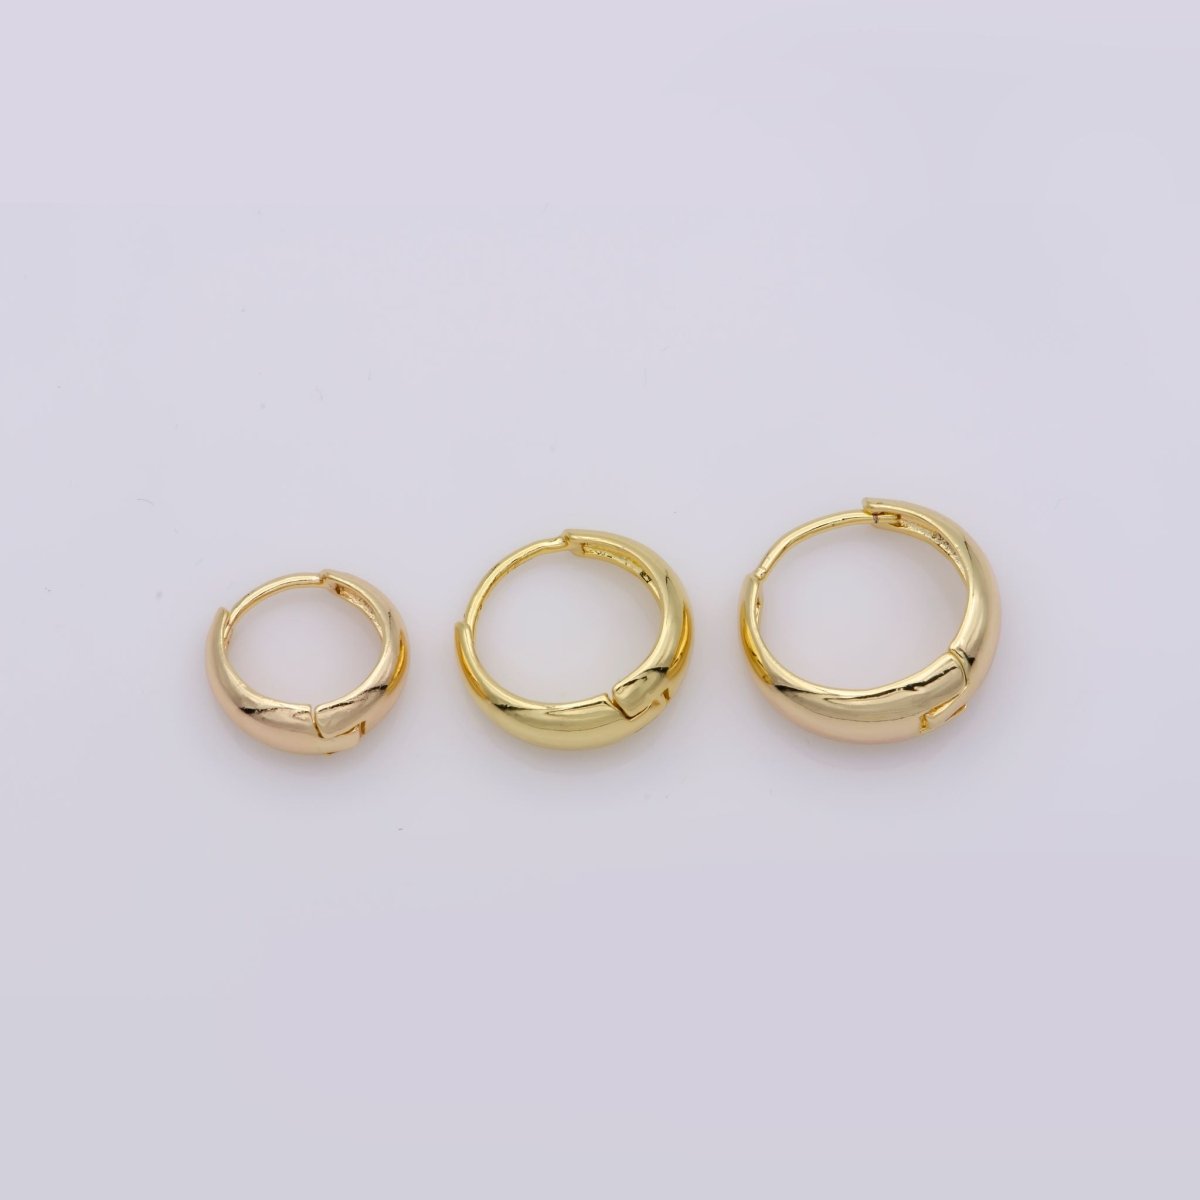 24K Gold Filled Huggie Hoops / Perfect for Every Day Wear / Minimalist Earring Jewelry / Perfect Gift For Her and For Girls P-033 P-036 P-038 P-249 - DLUXCA